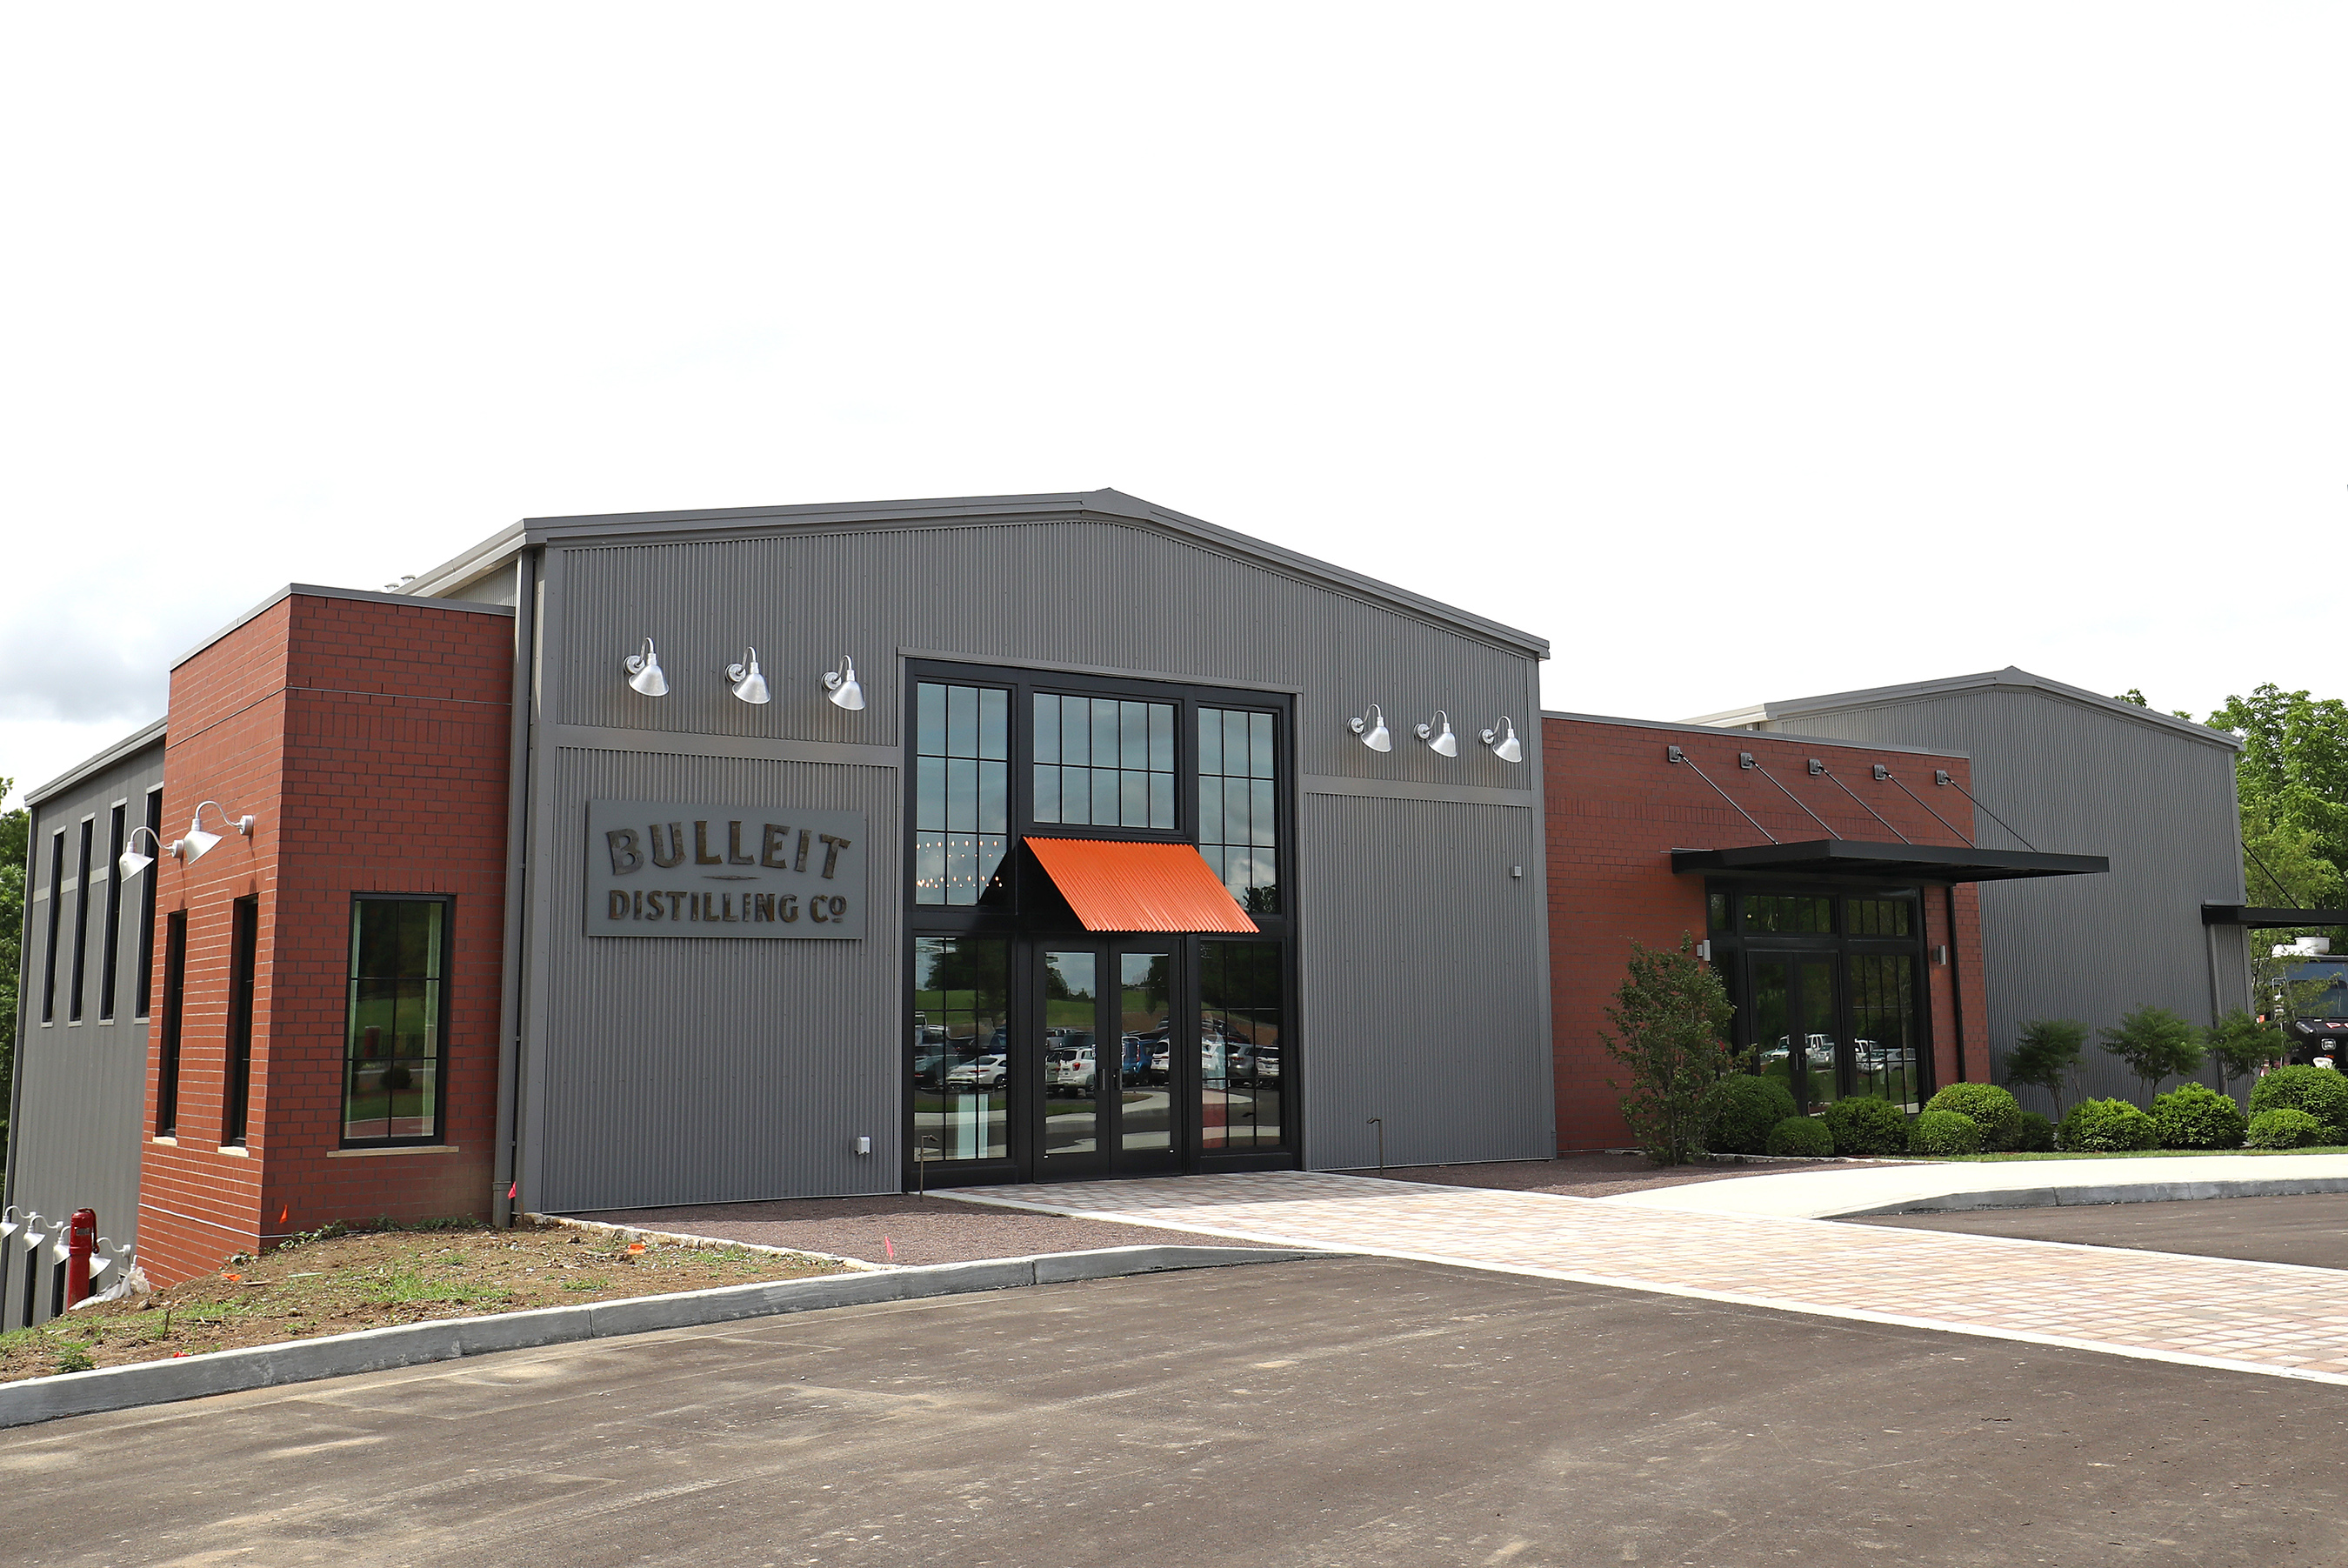 The New Bulleit Distilling Co. Visitor Experience Opens in Shelbyville, Ky